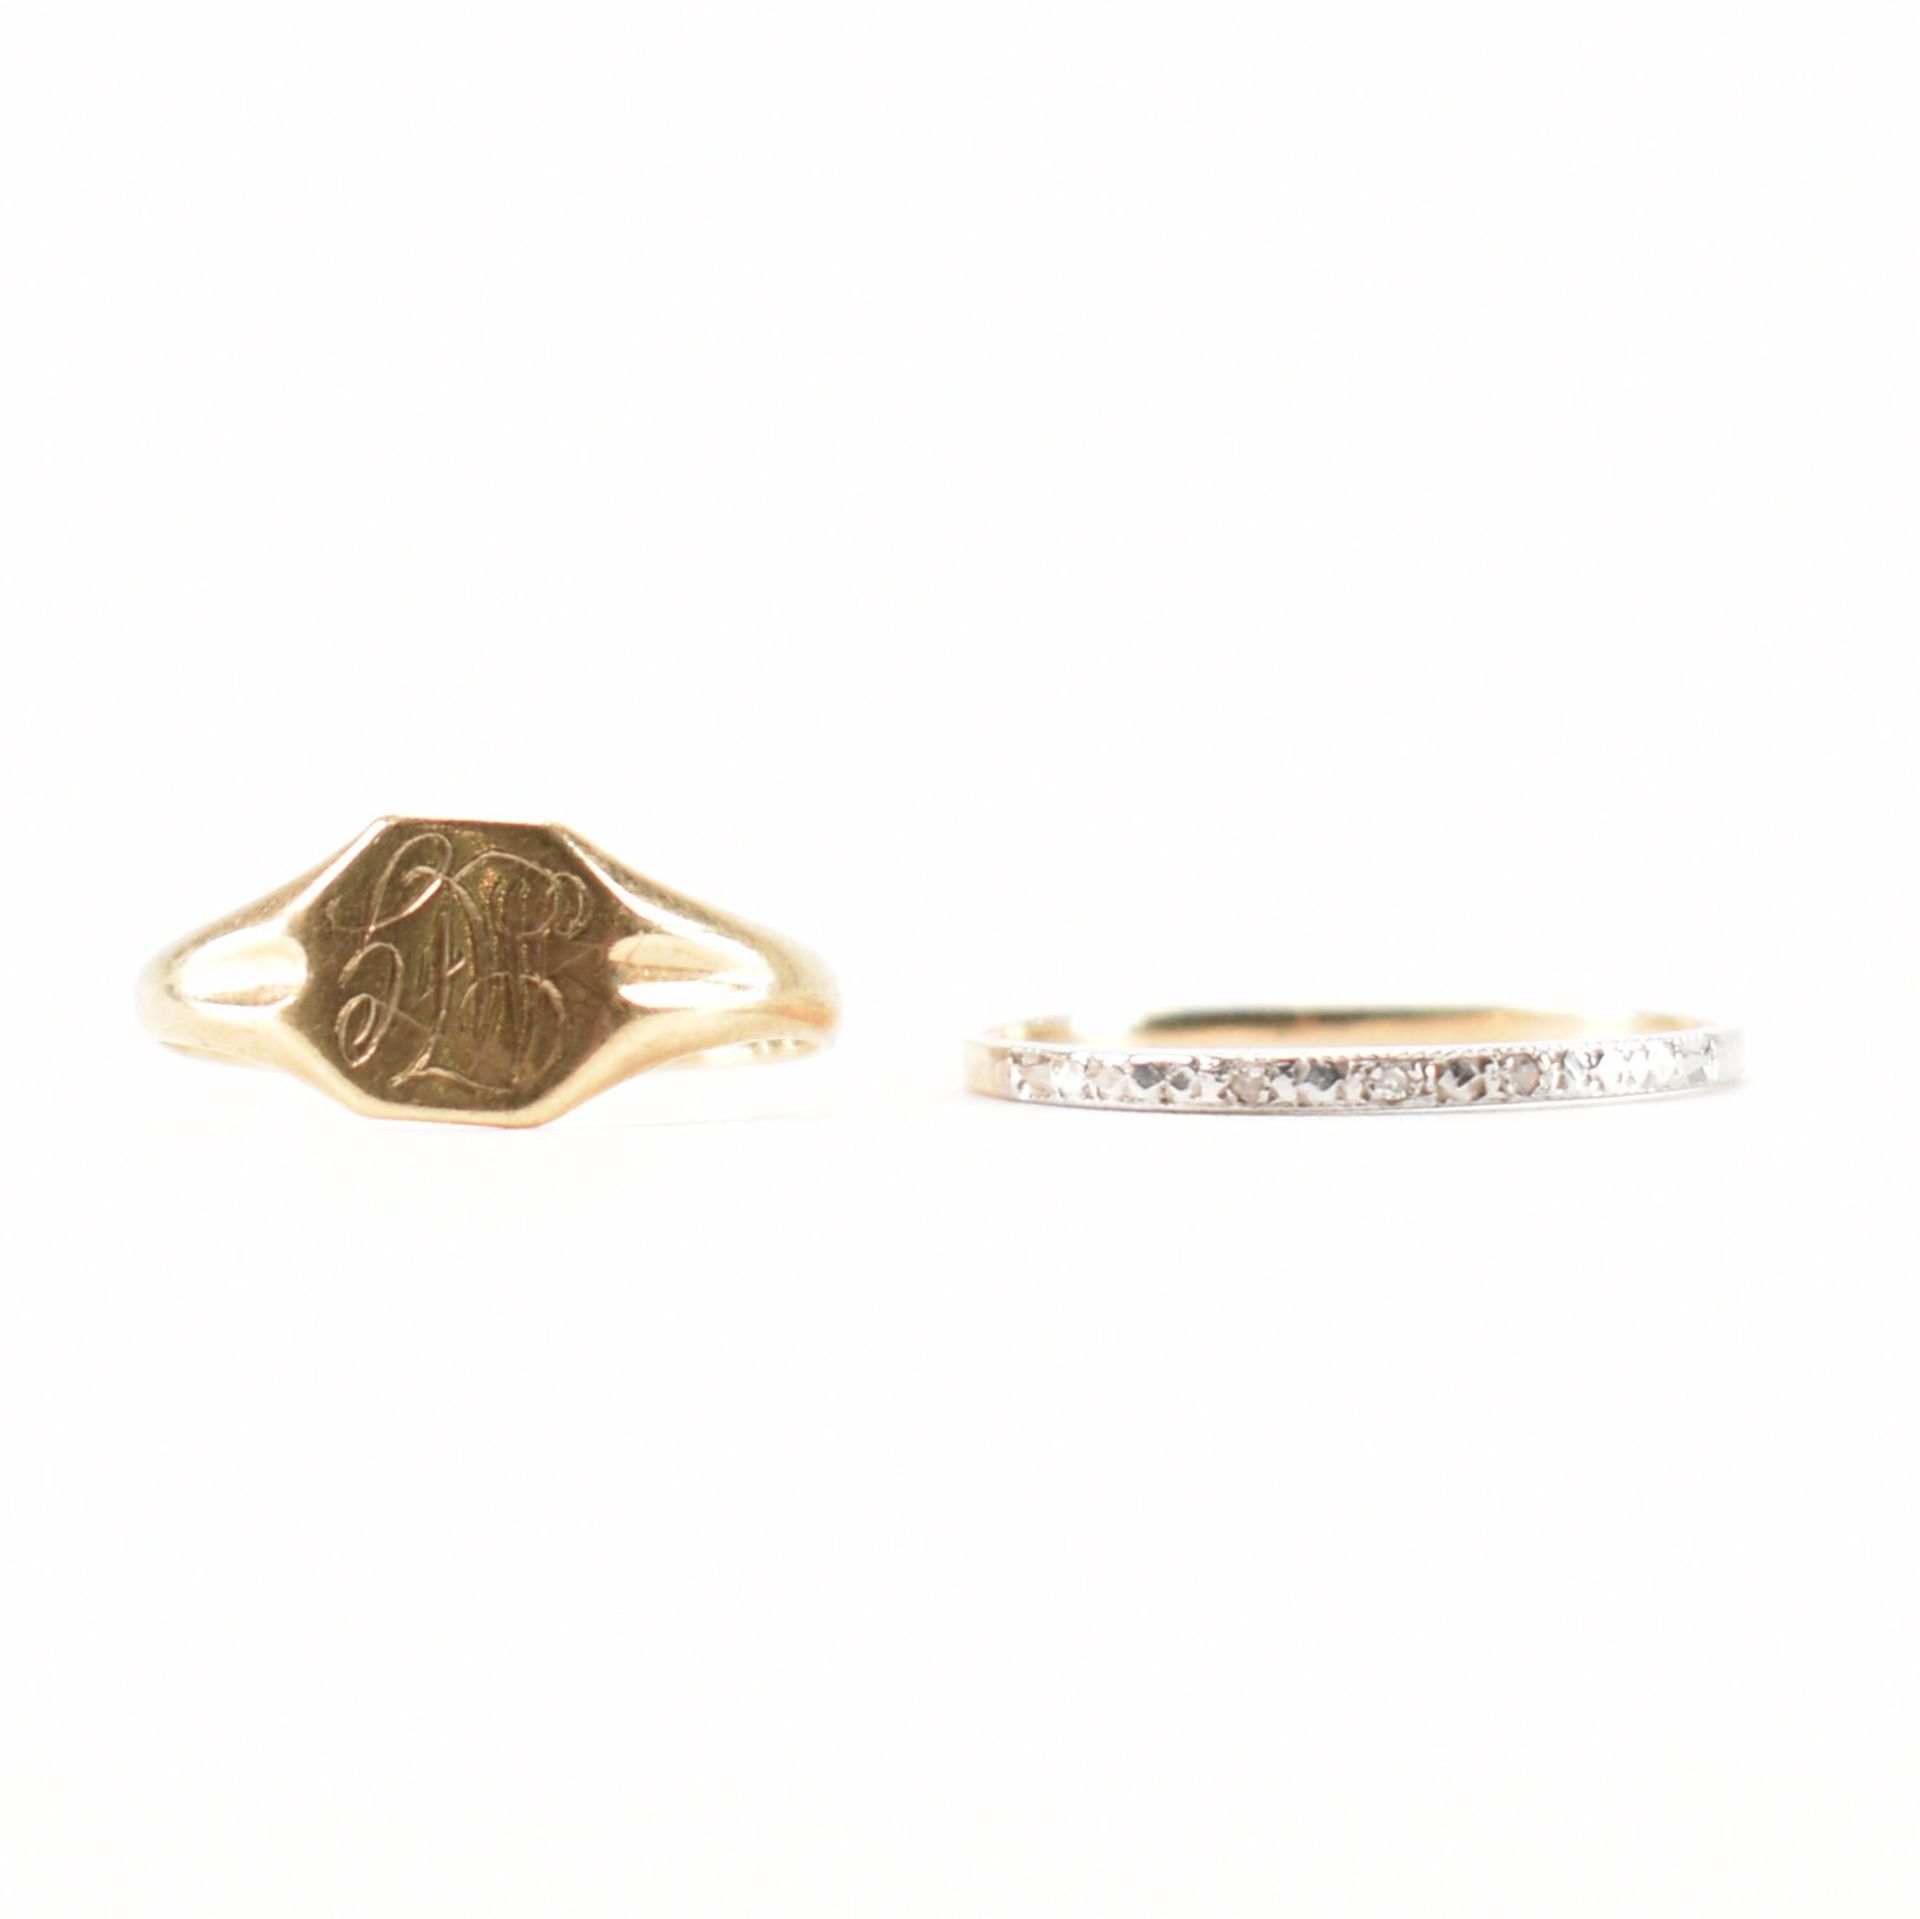 HALLMARKED 9CT GOLD SIGNET RING & GOLD BAND RING